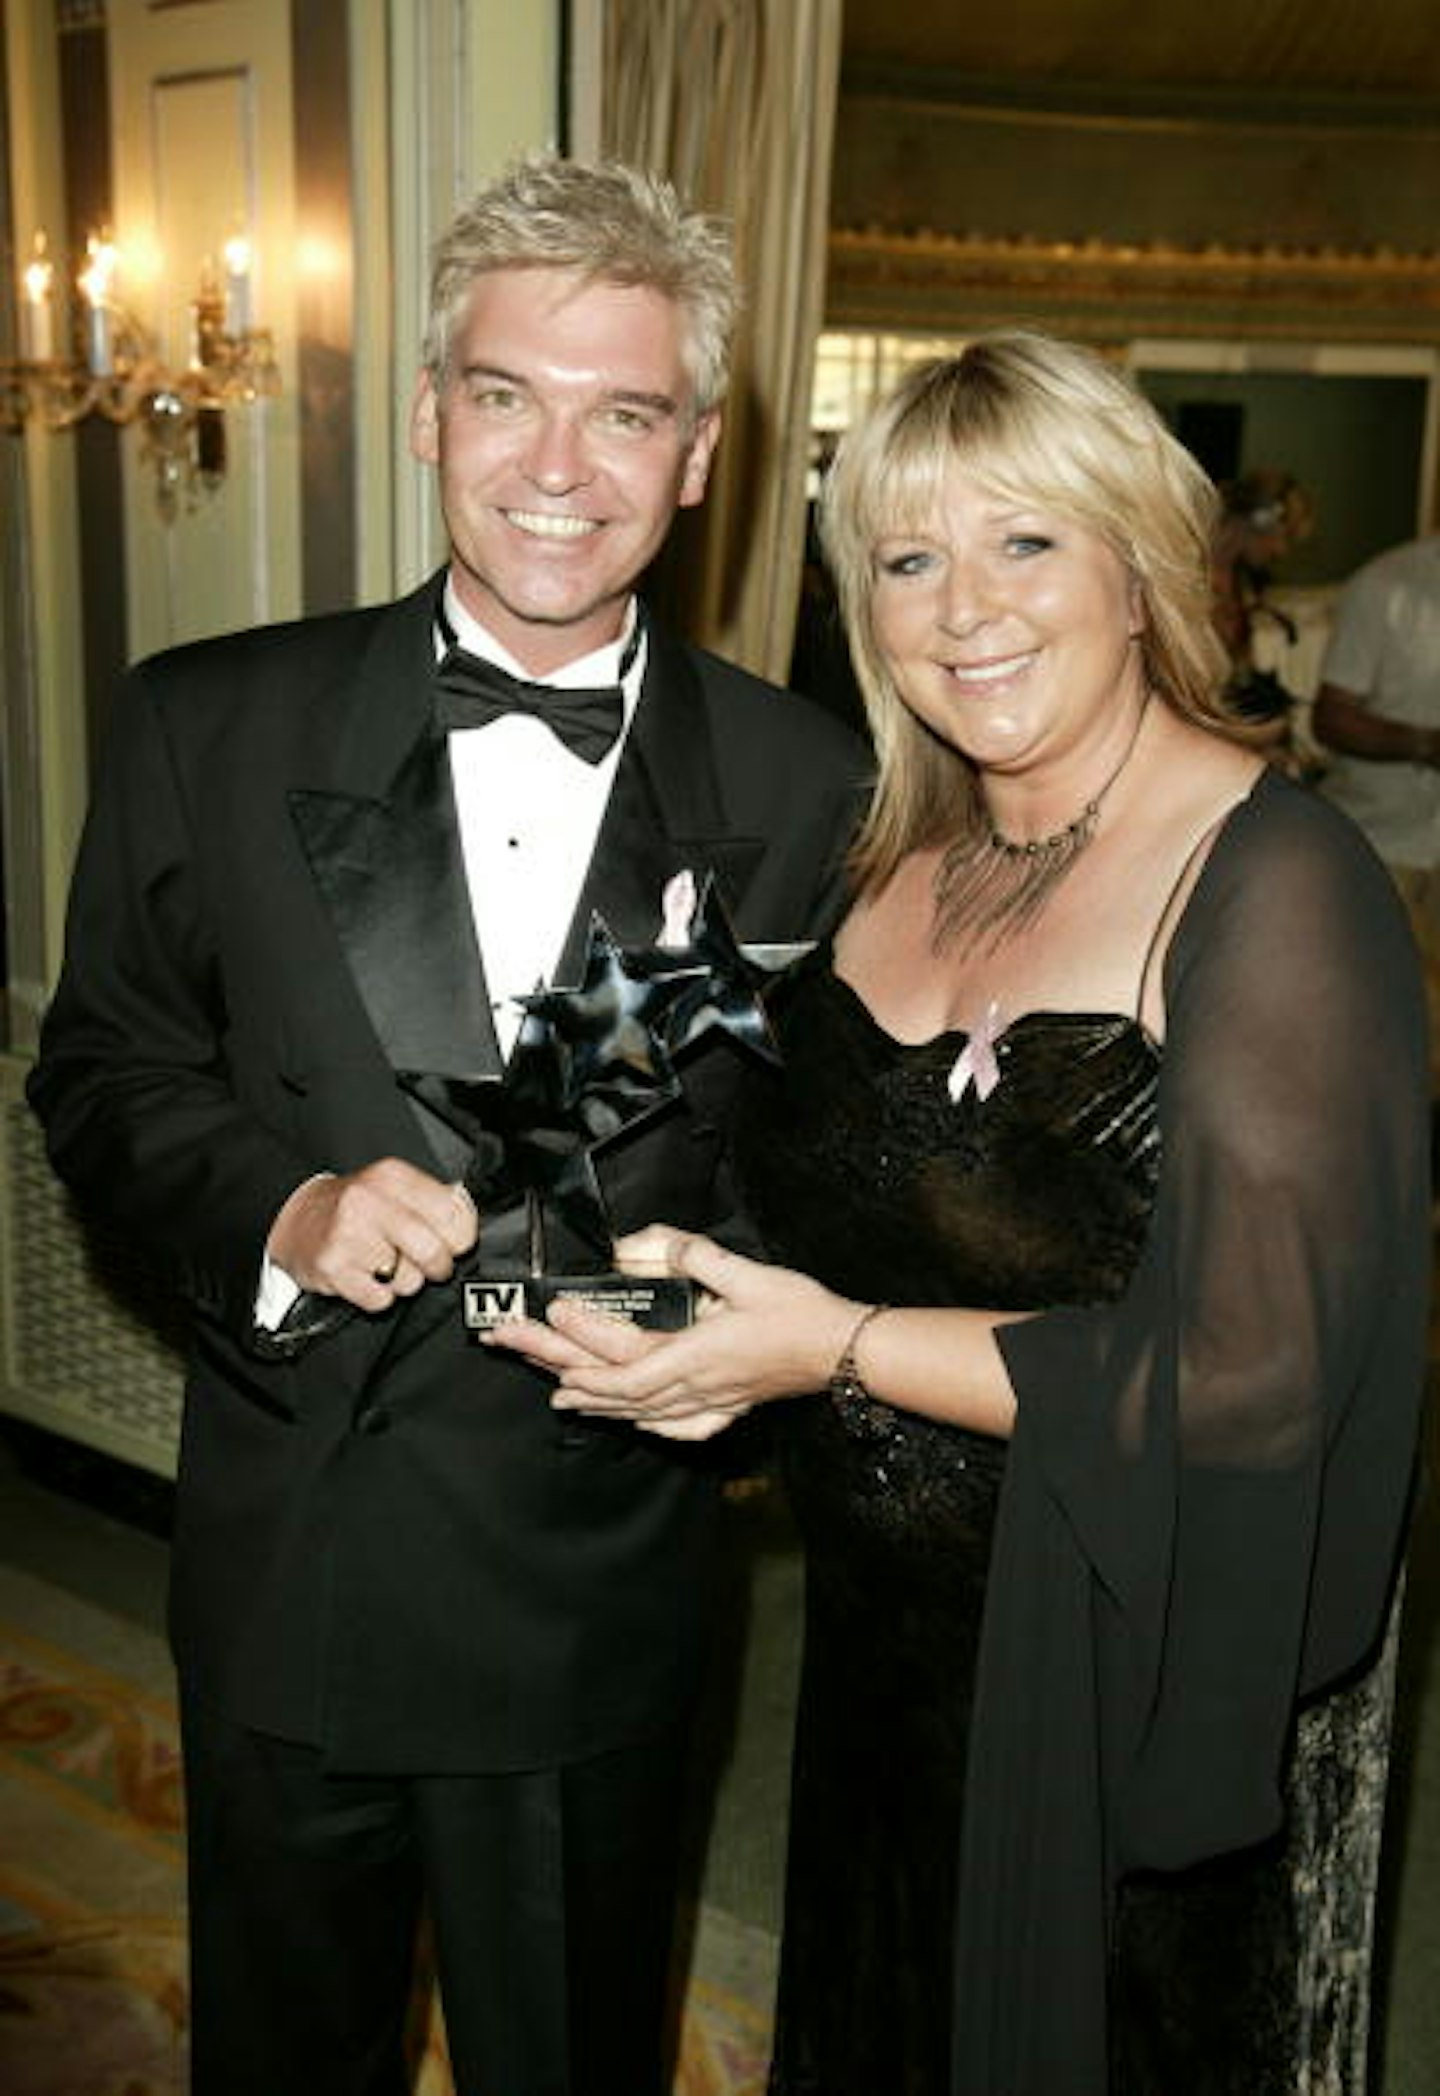 Fern Britton and Phillip Schofield at a TV awards ceremony in 2004